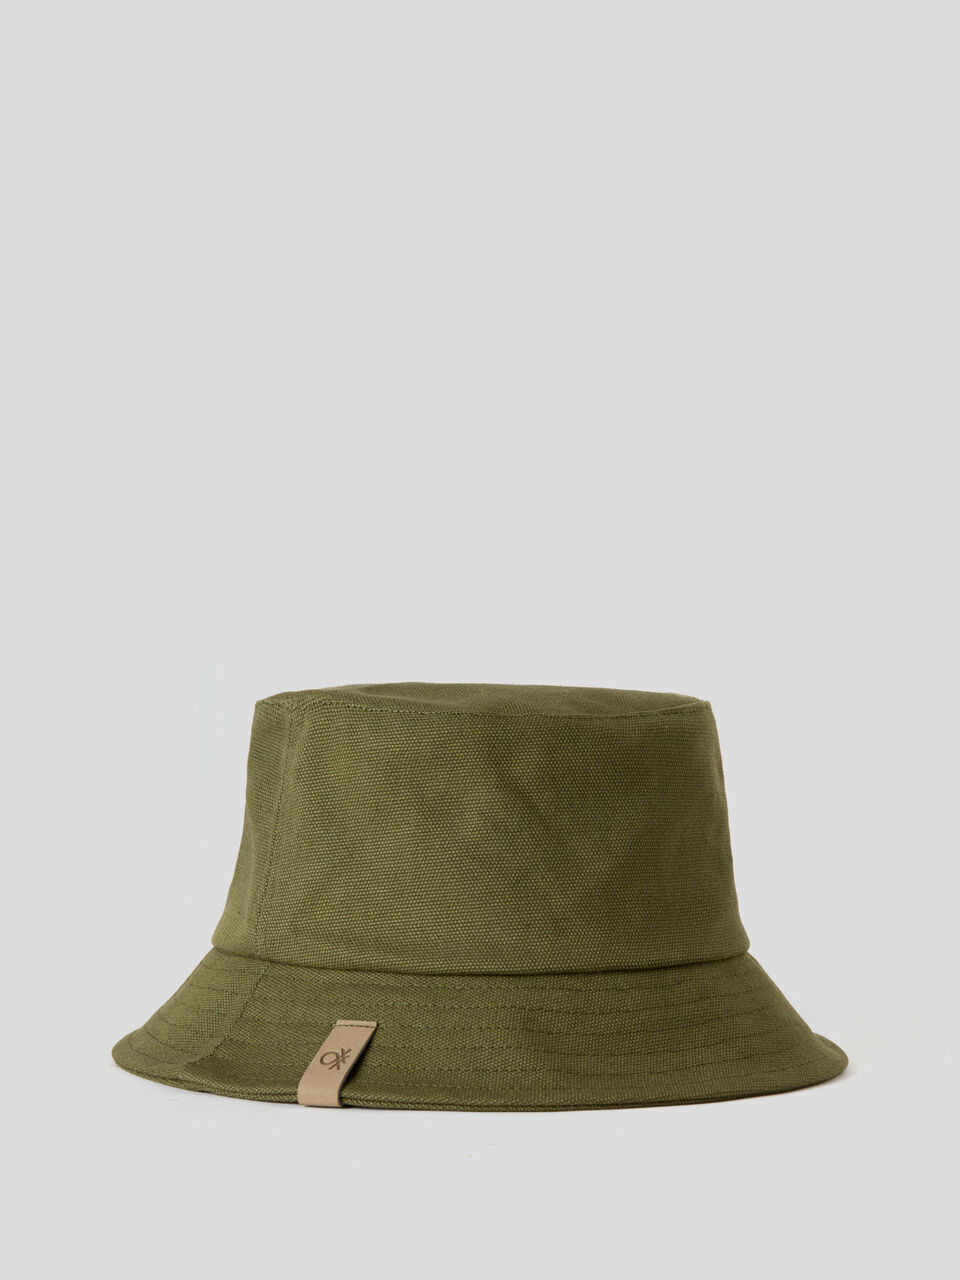 Fisherman's hat in 100% cotton - Military Green